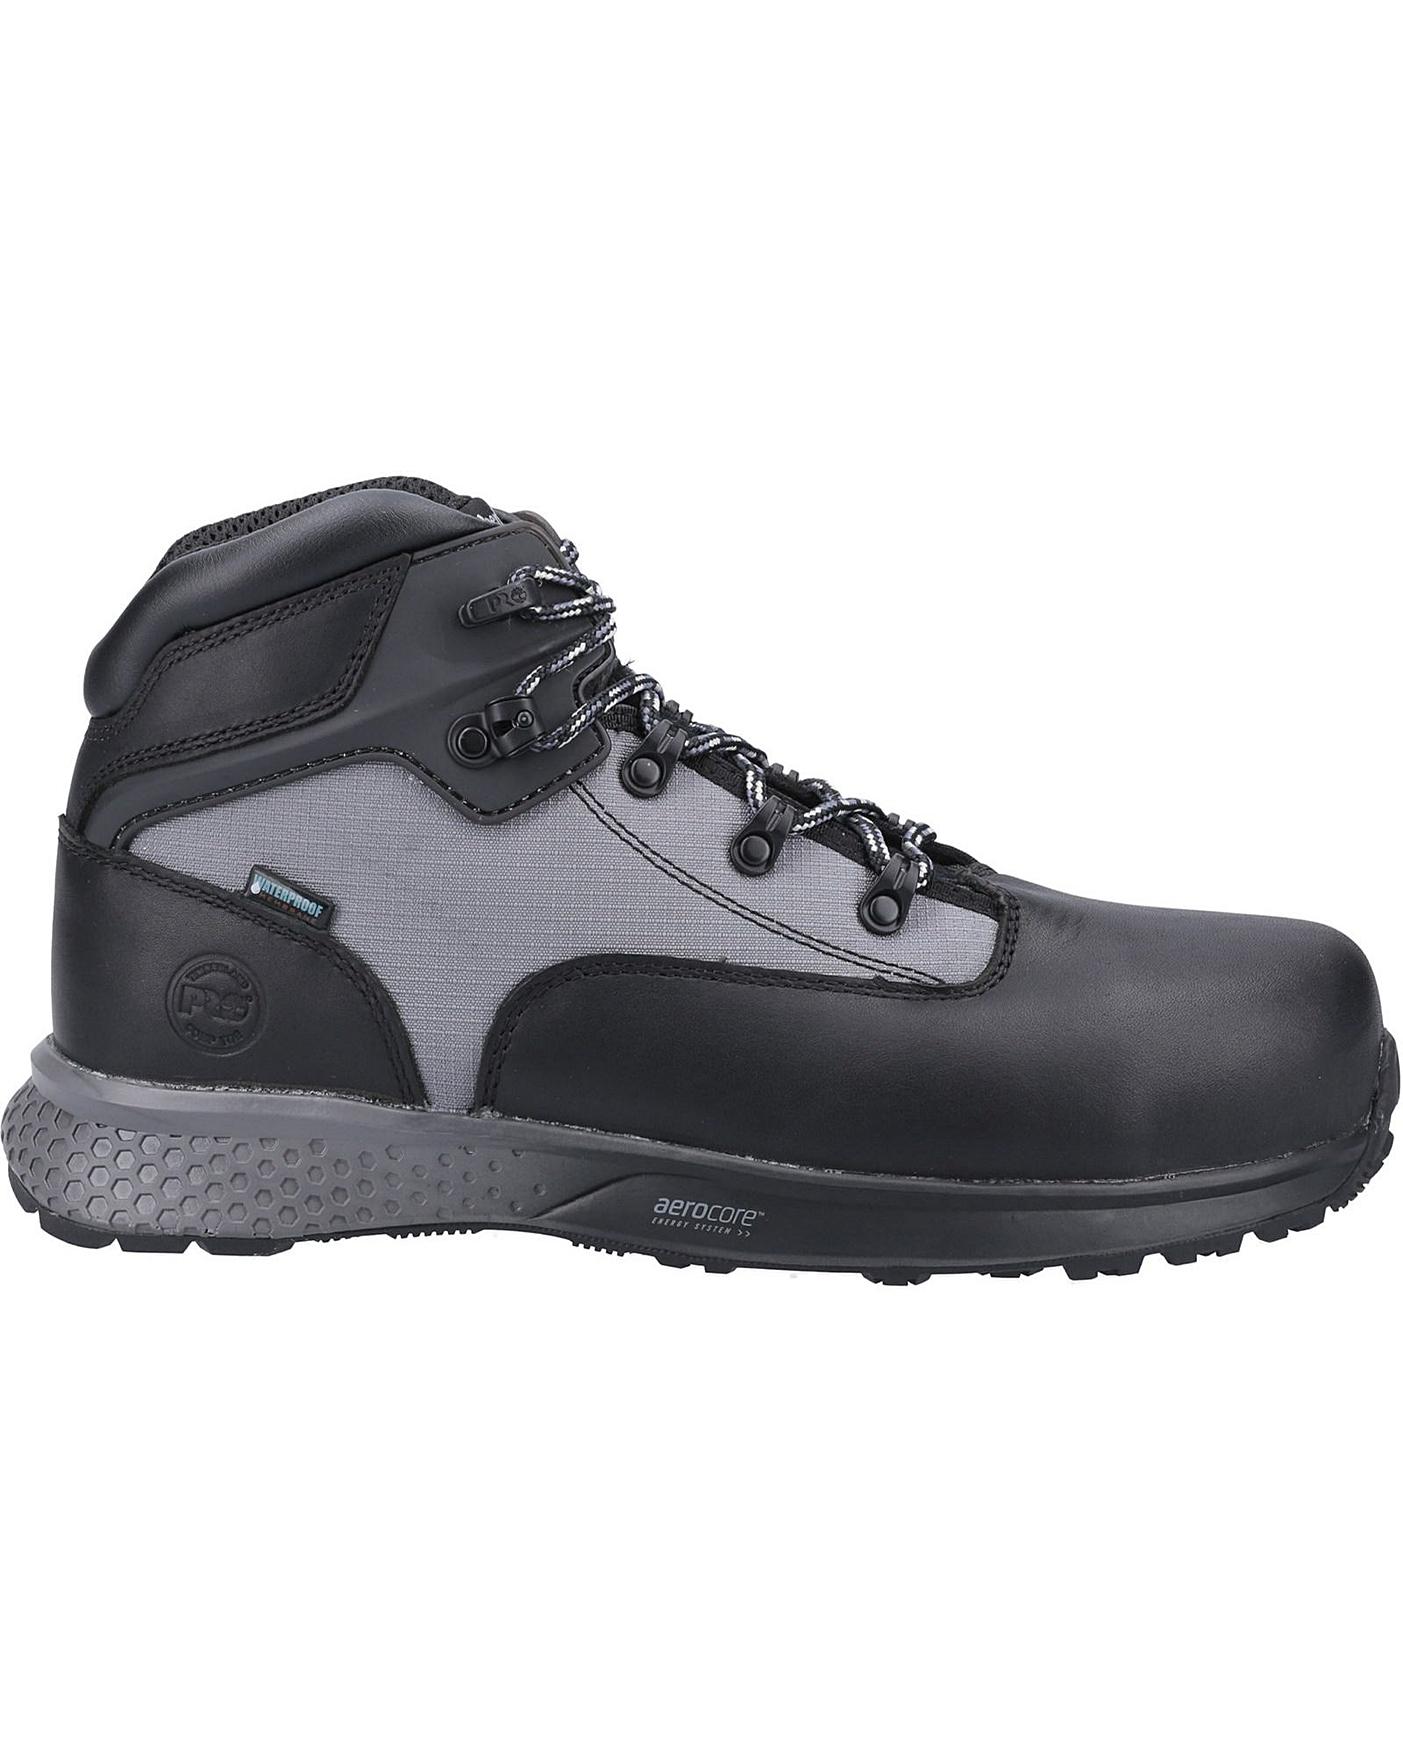 Euro Hiker Safety Boot